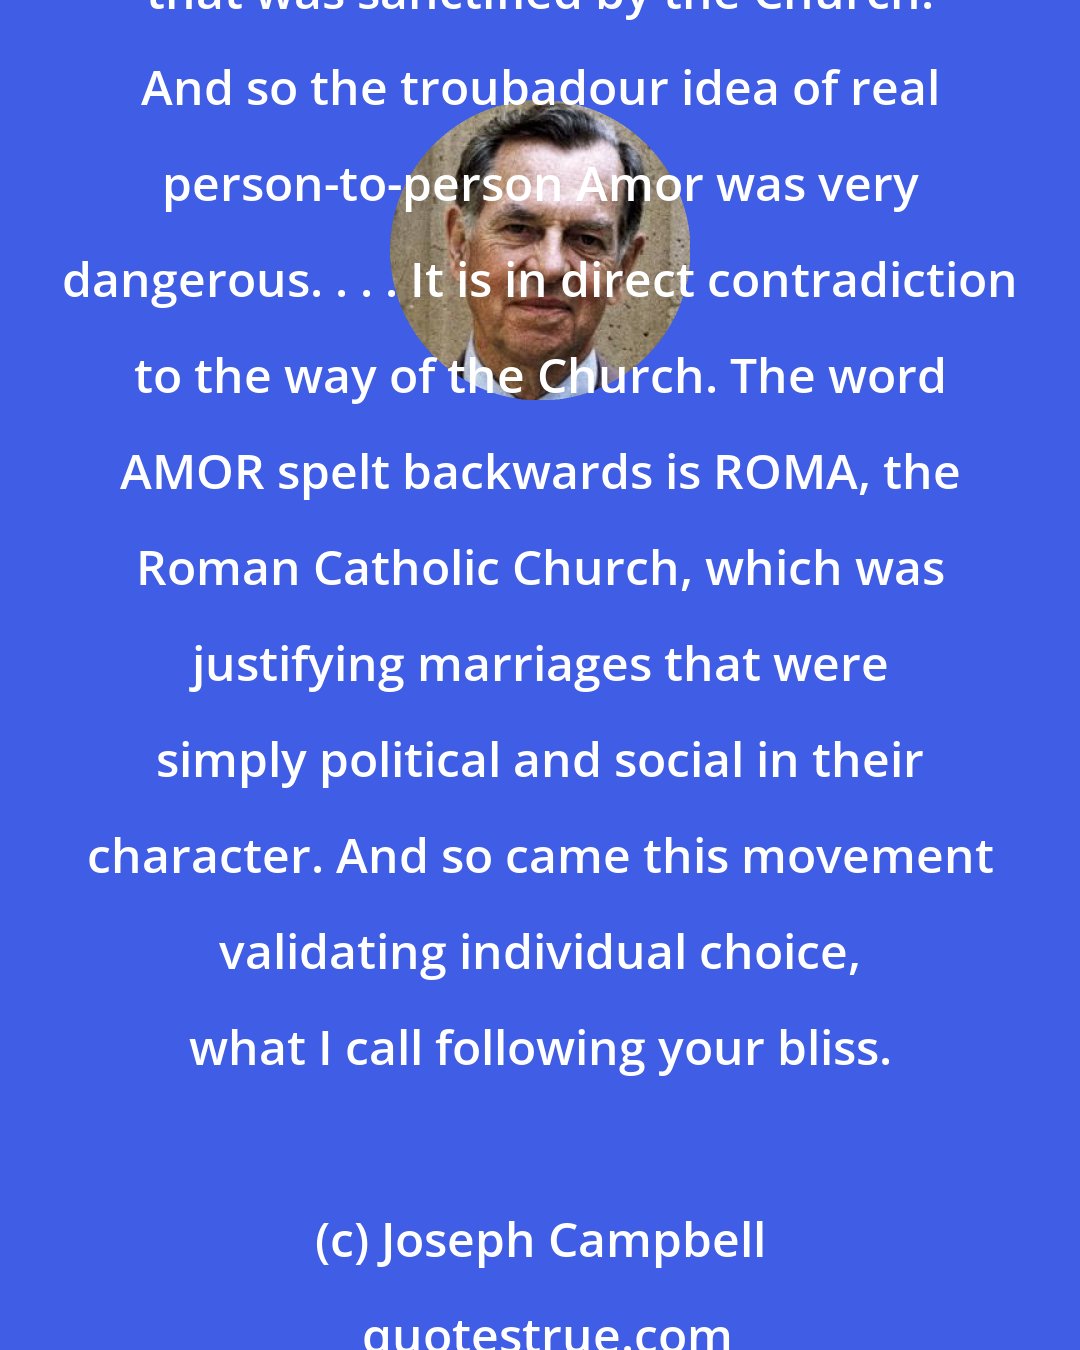 Joseph Campbell: The usual marriage in traditional cultures was arranged for by the families. It wasn't a person-to-person decision at all. . . . In the Middle Ages, that was the kind of marriage that was sanctified by the Church. And so the troubadour idea of real person-to-person Amor was very dangerous. . . . It is in direct contradiction to the way of the Church. The word AMOR spelt backwards is ROMA, the Roman Catholic Church, which was justifying marriages that were simply political and social in their character. And so came this movement validating individual choice, what I call following your bliss.